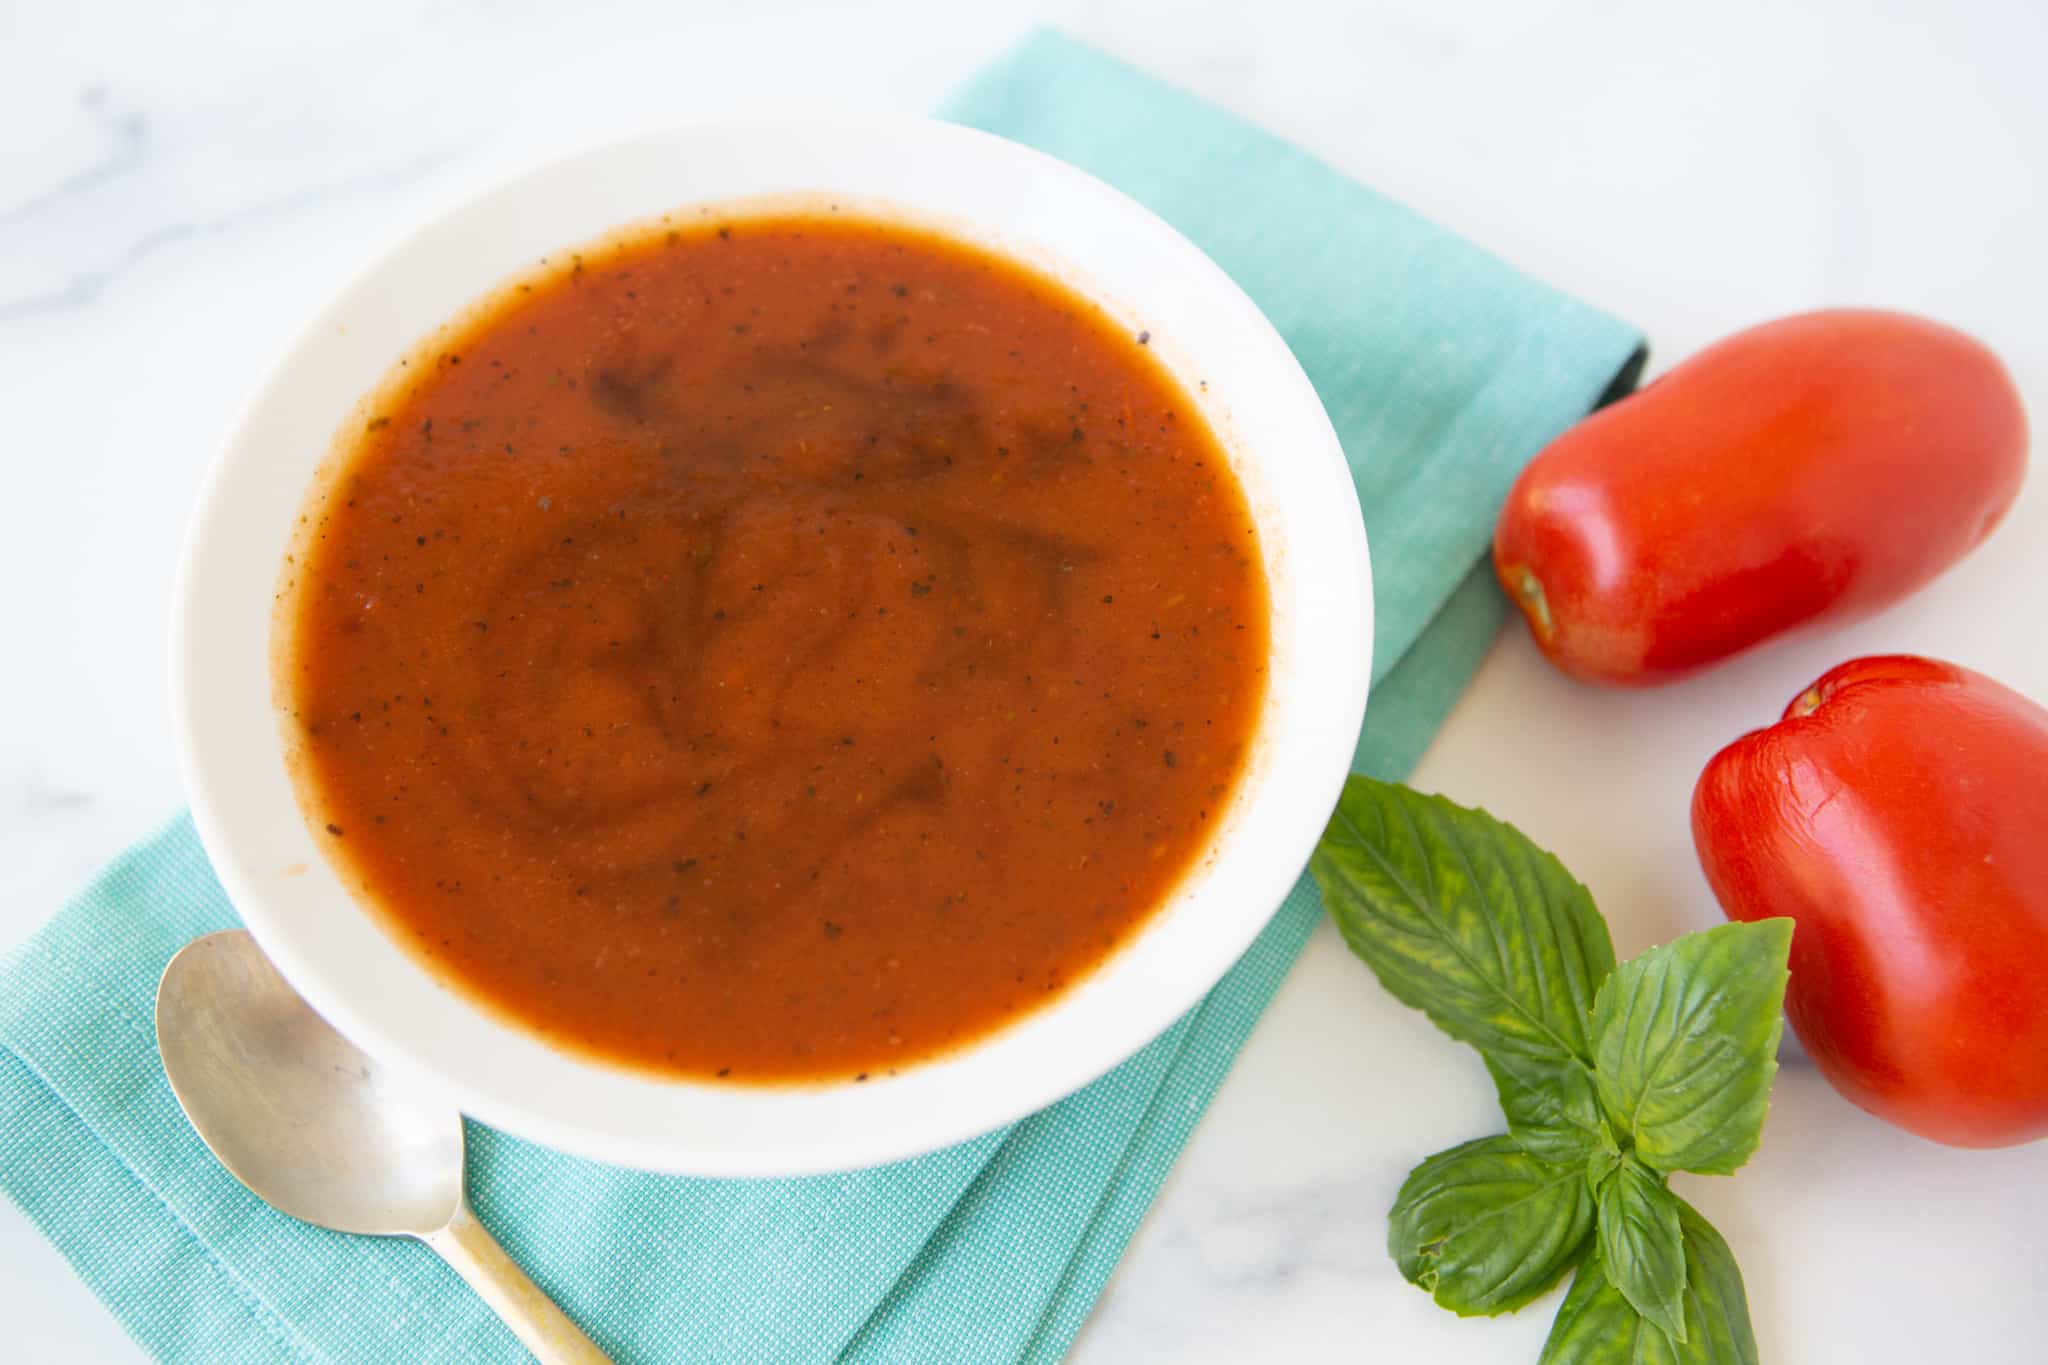 tomato soup garnished with a swirl of balsamic vinegar